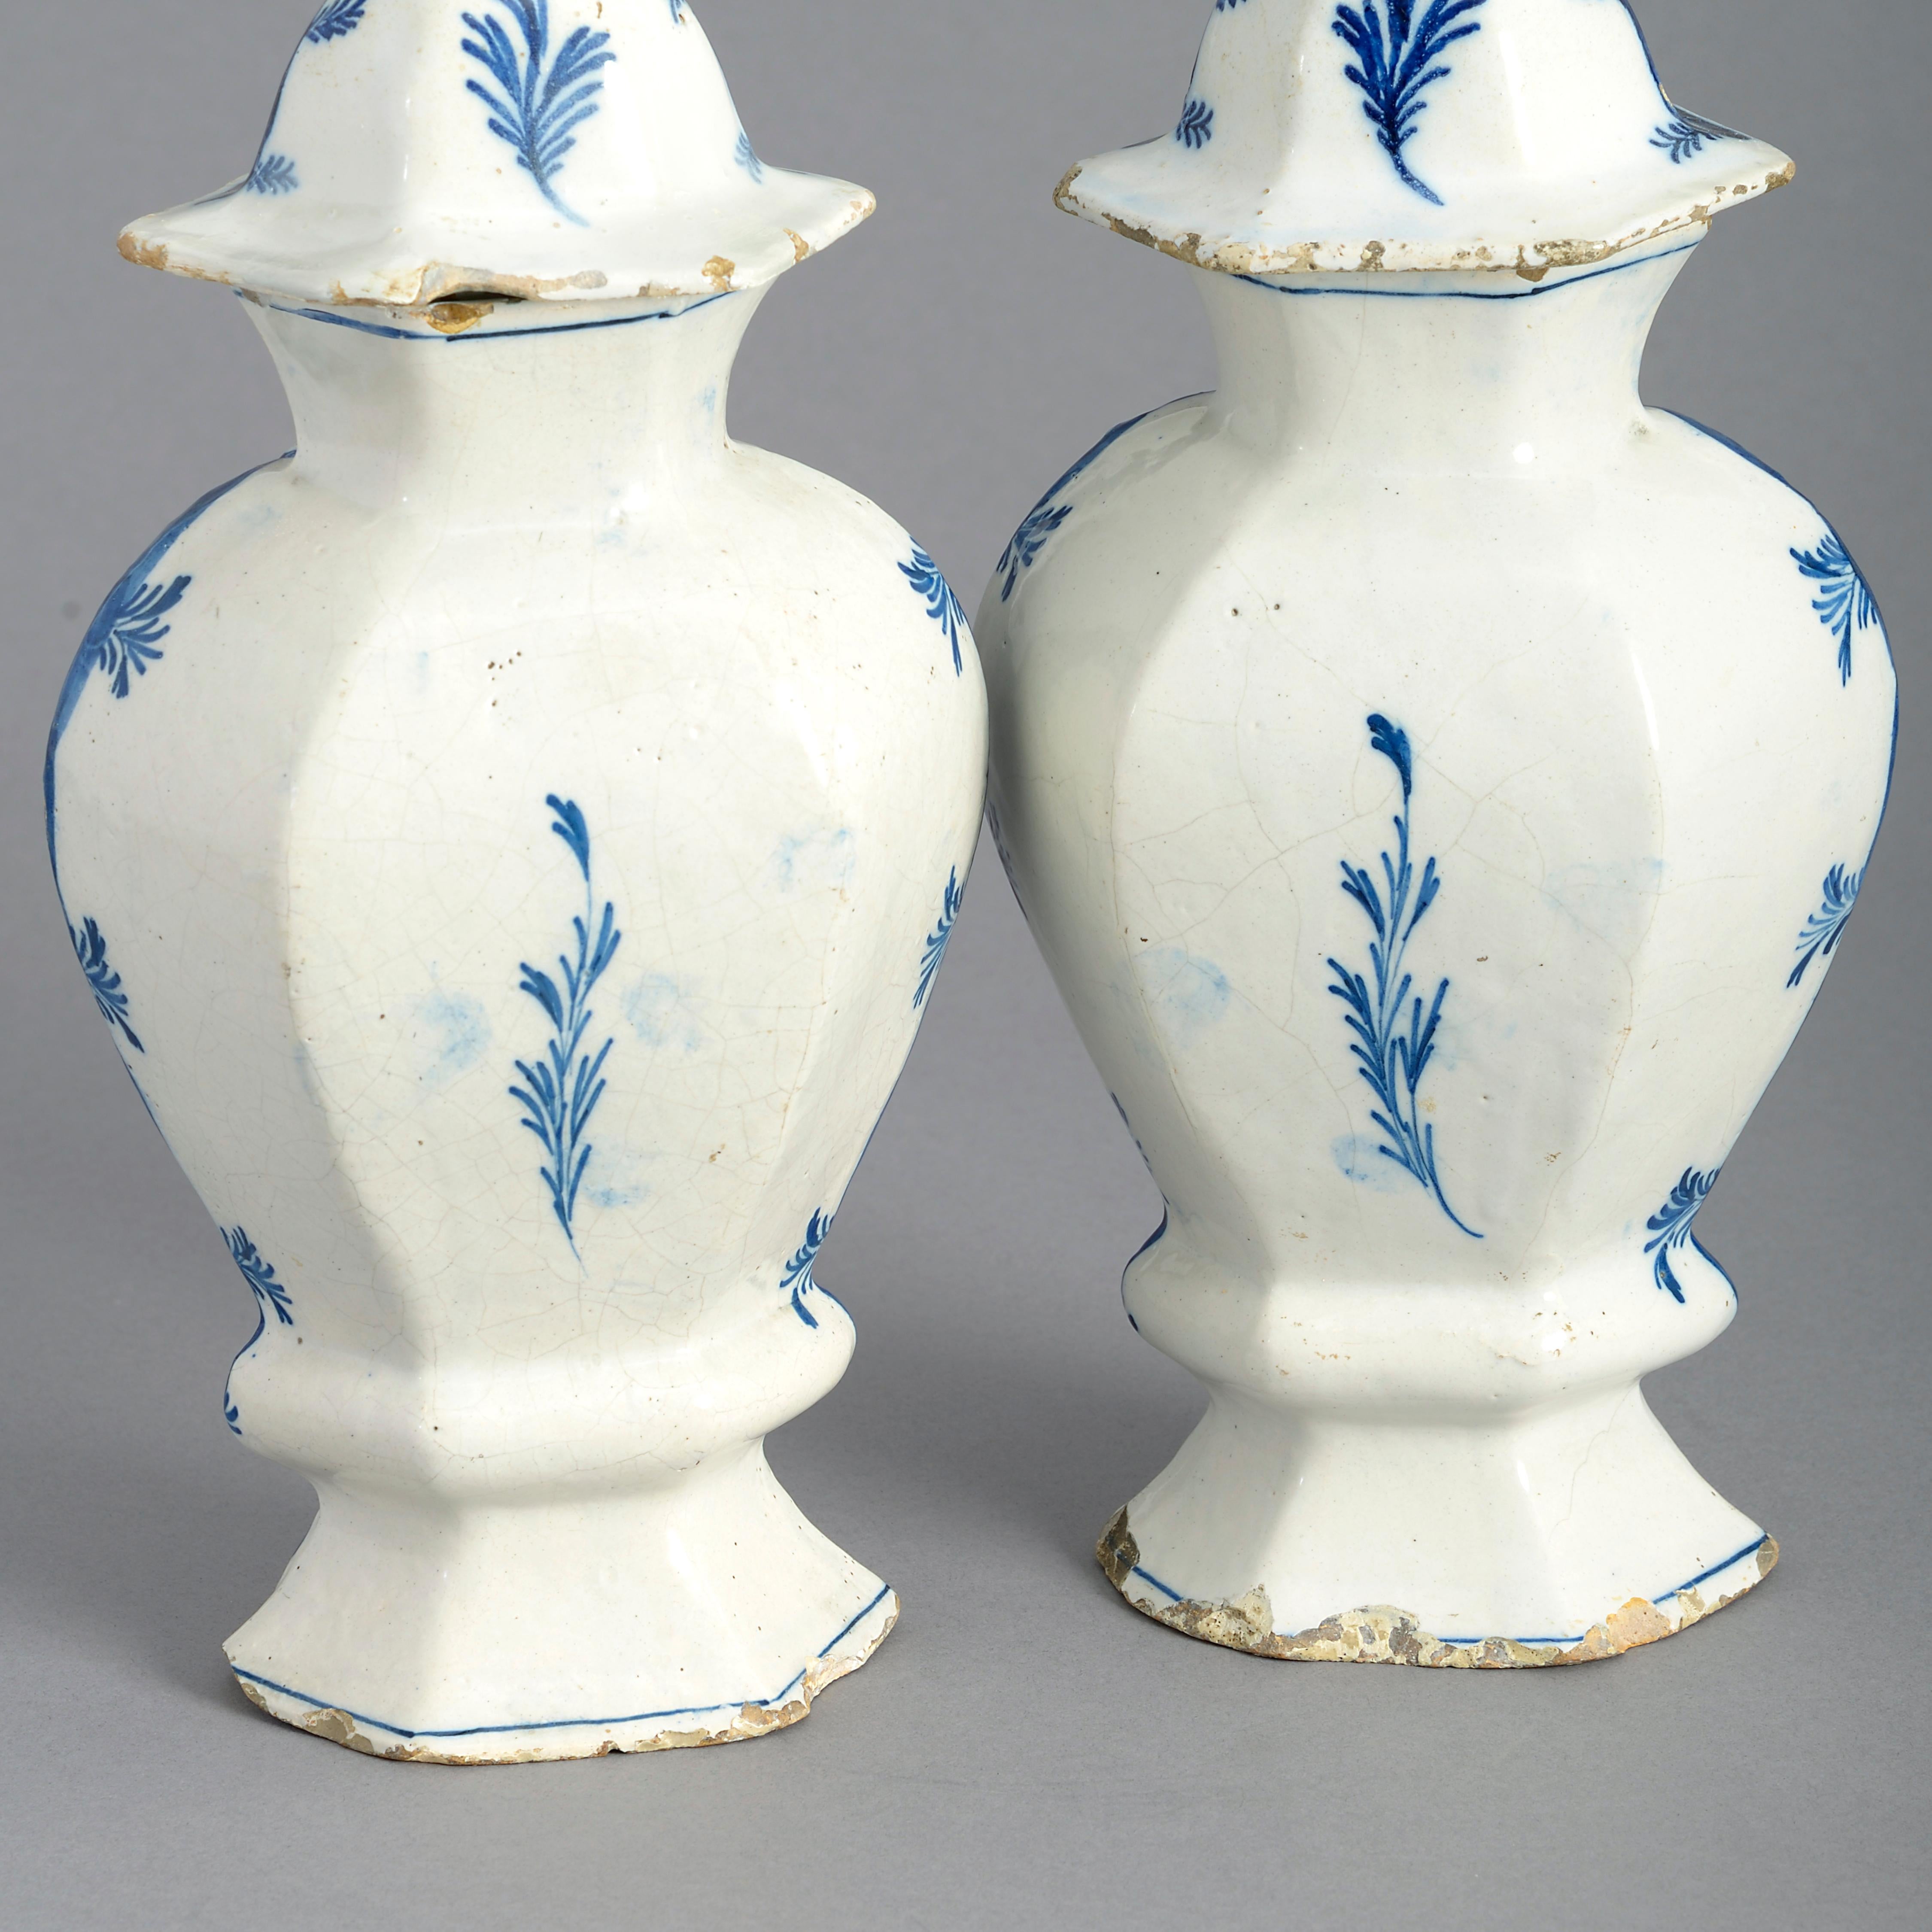 Fired Pair of 18th Century Blue and White Delft Vases